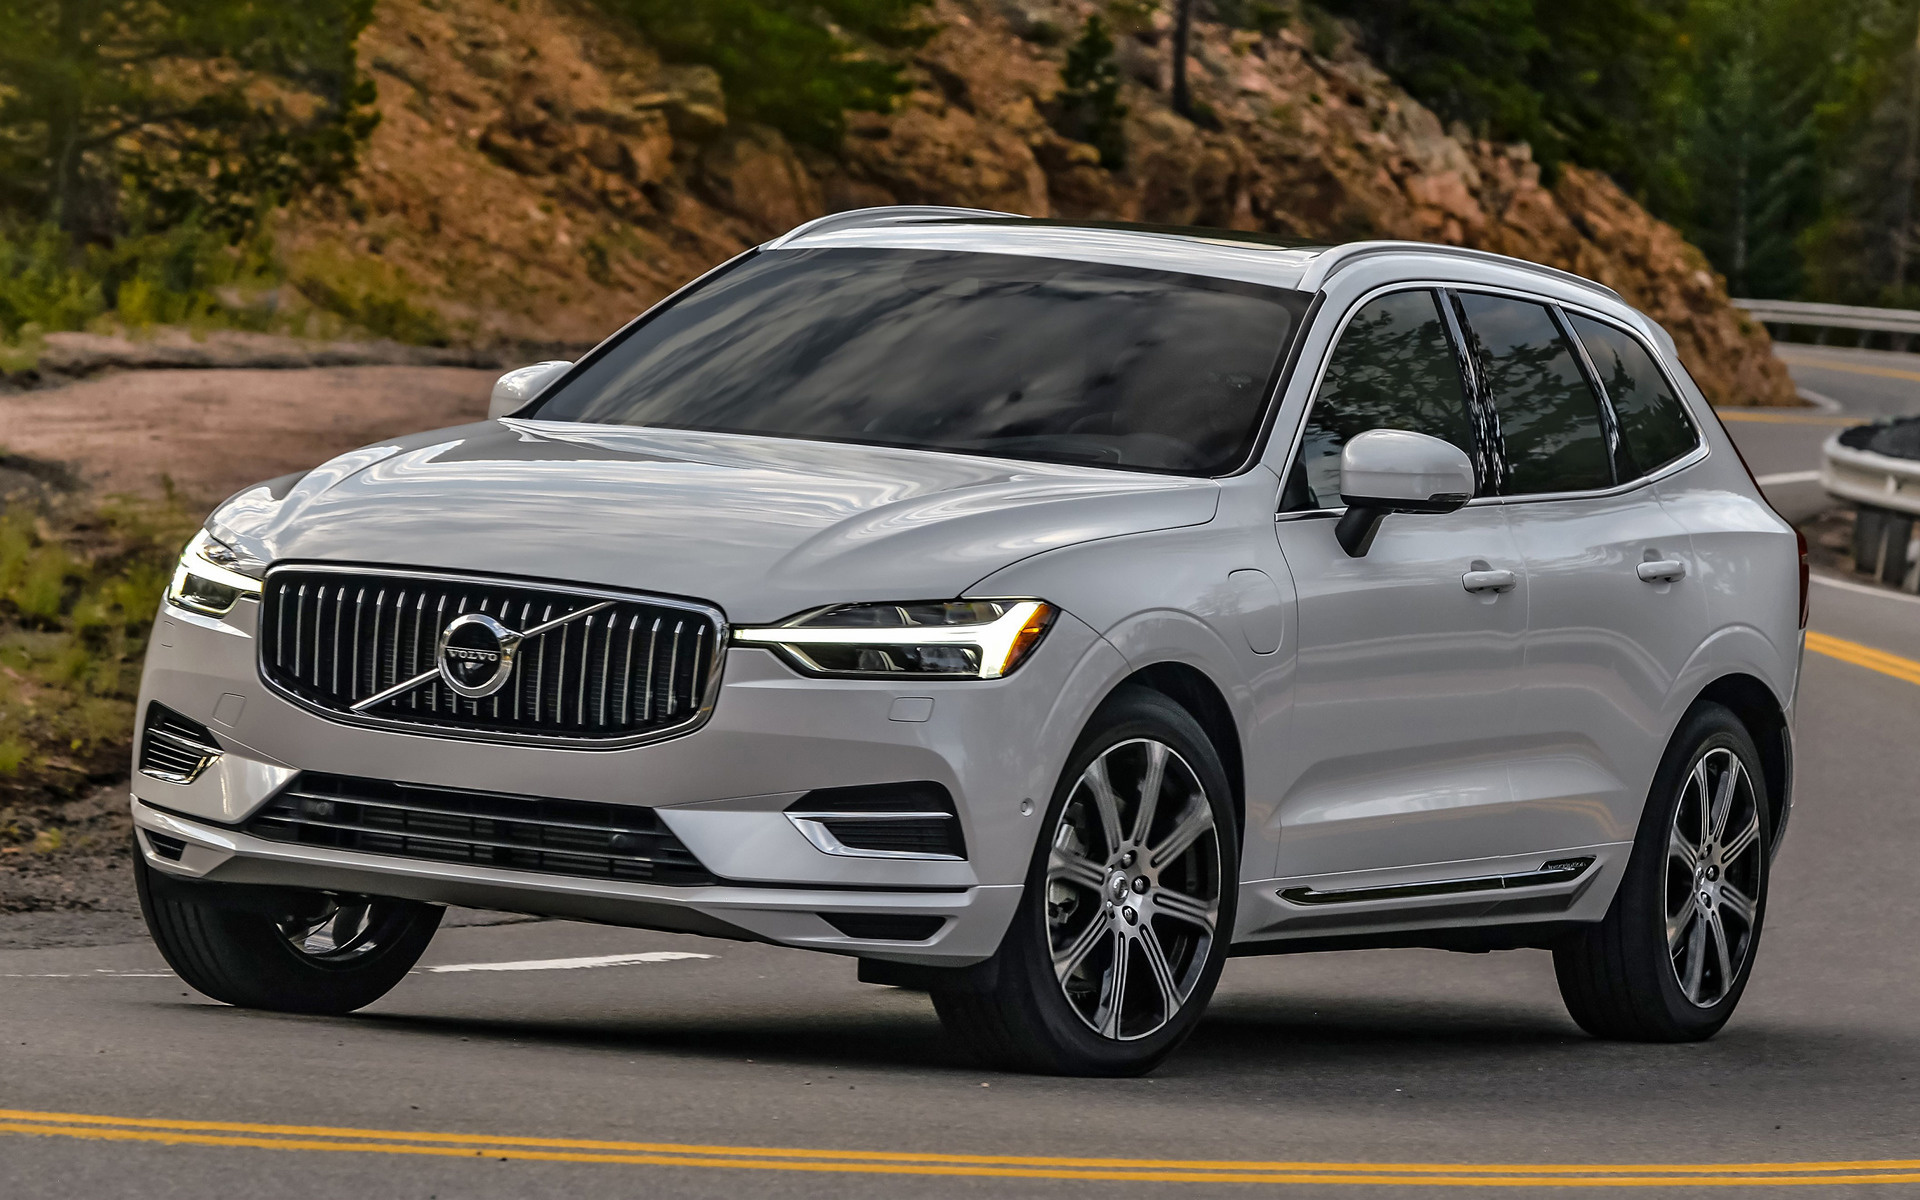 Volvo XC60, 2018 US wallpapers, High-definition images, Luxurious appearance, 1920x1200 HD Desktop